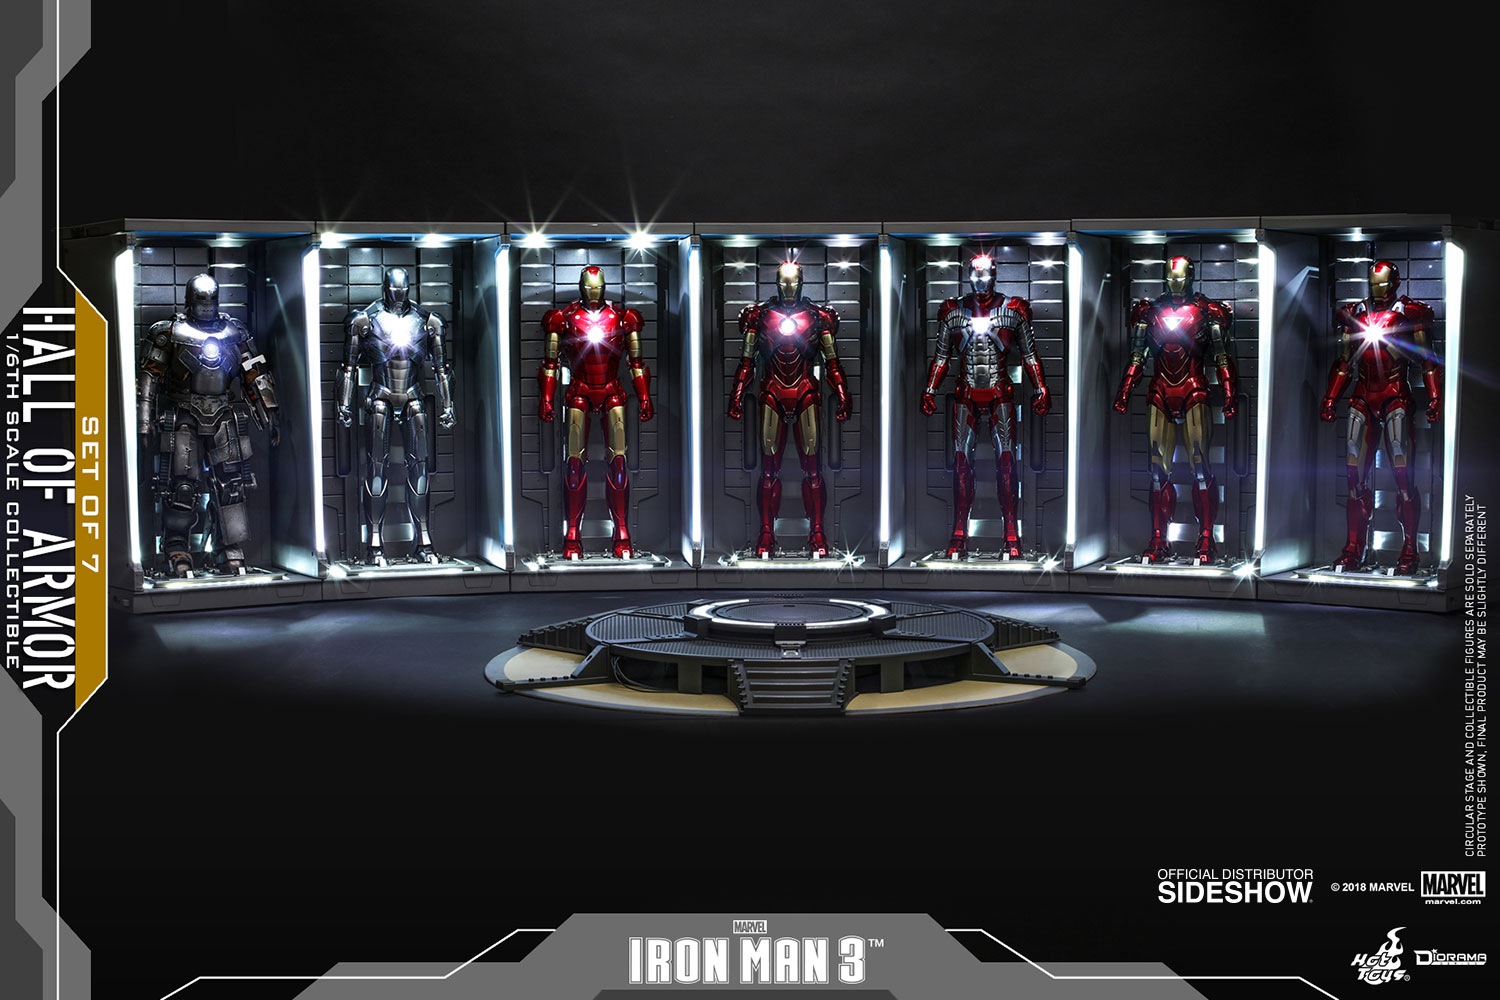 marvel-iron-man3-hall-of-armor-set-of-7-sixth-scale-accessory-hot-toys-904265-01.jpg